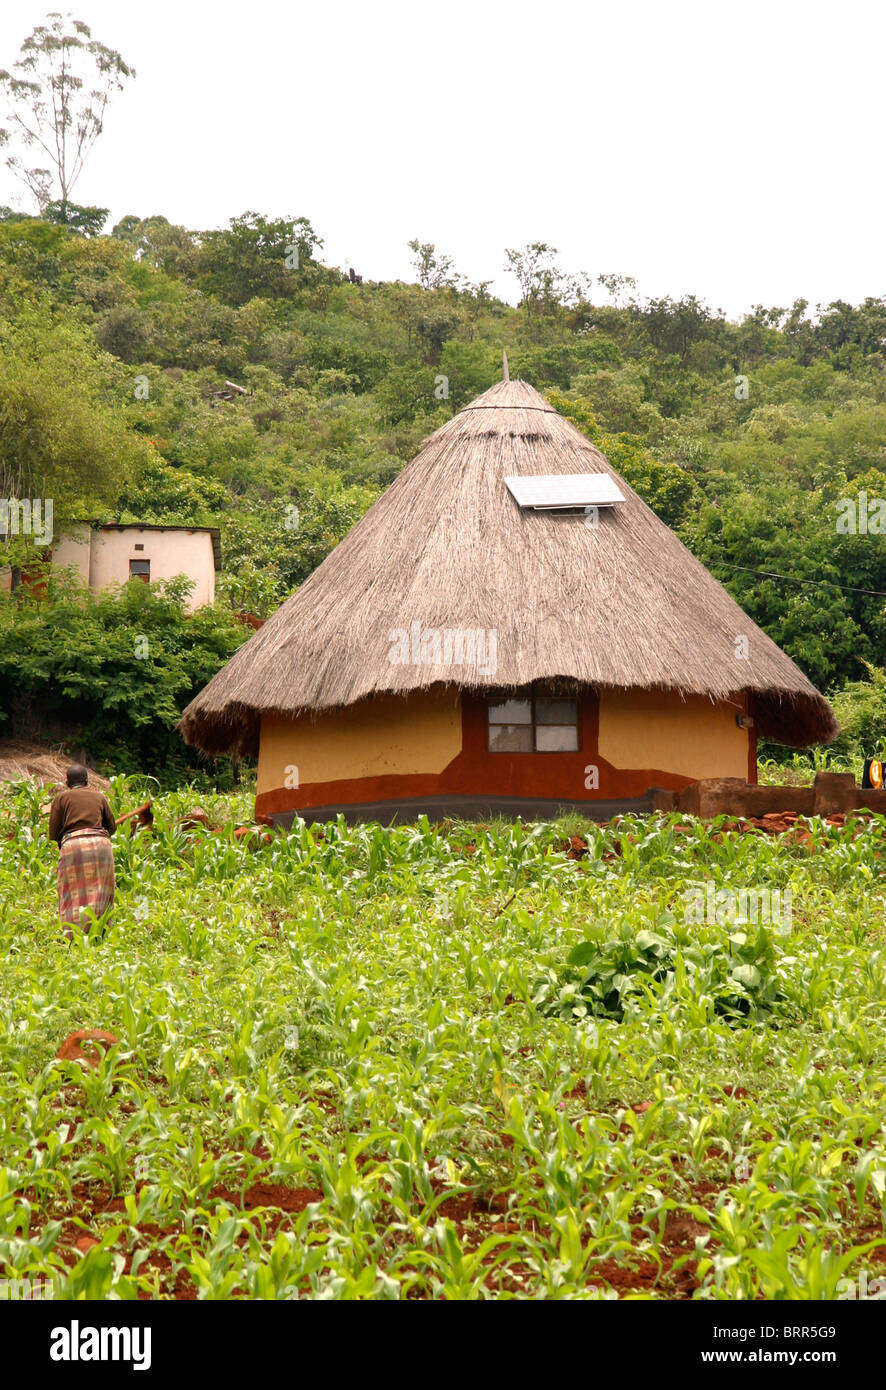 A traditional Venda hut with a solar panel on the thatch roof and a mielie field in the foreground Stock Photo